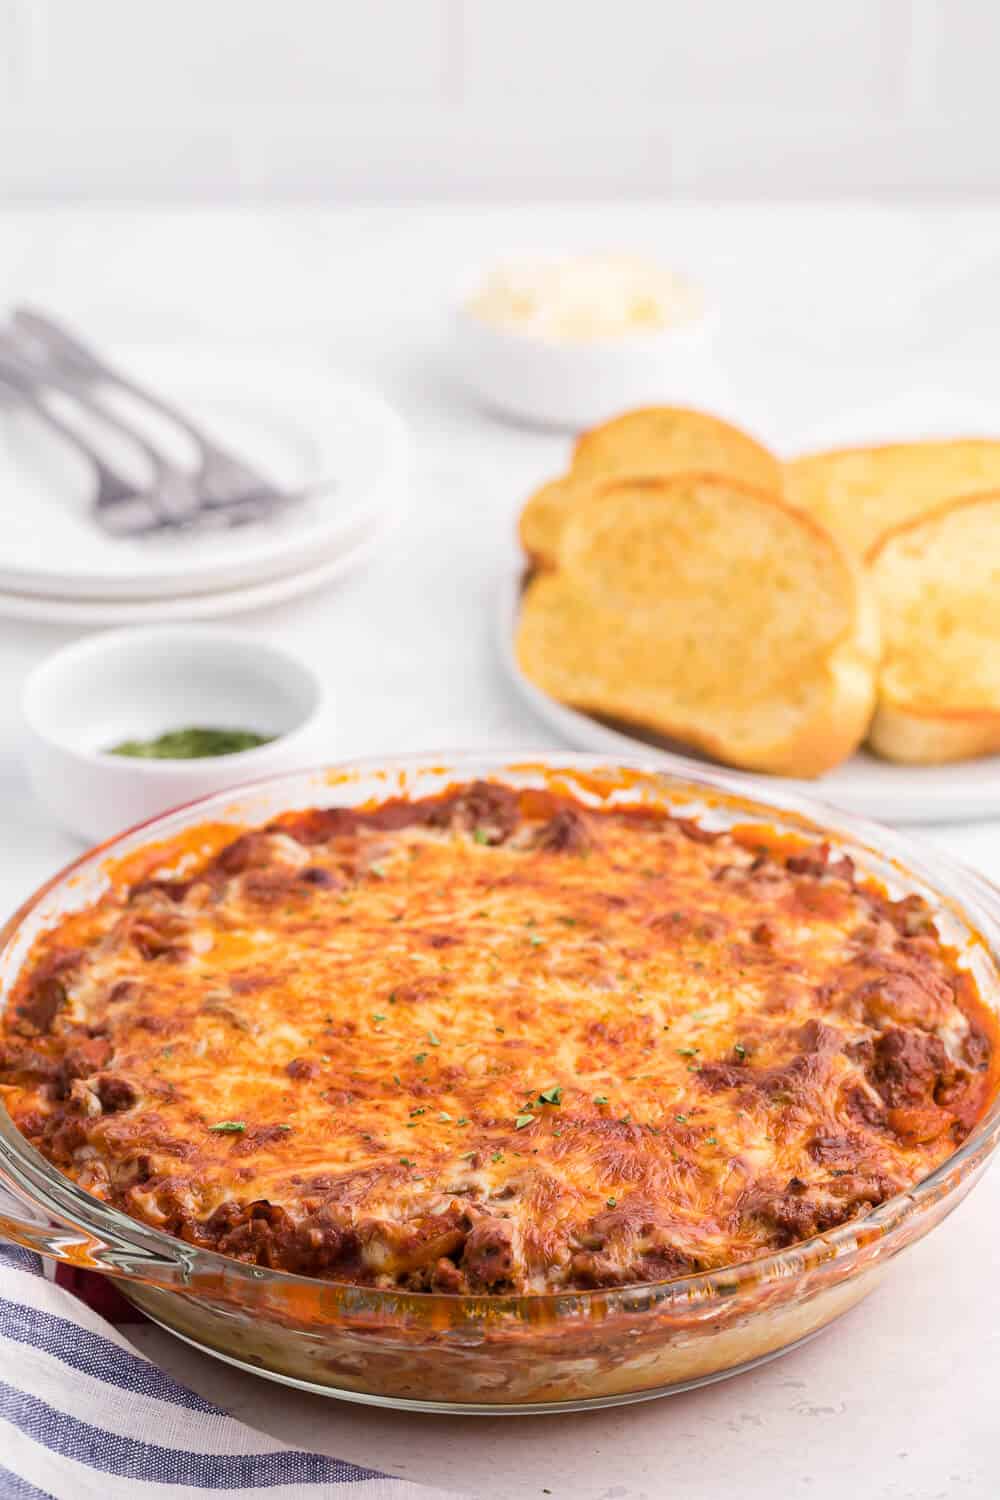 Spaghetti Pie - Lasagna + spaghetti = a big family hit! Using simple pantry ingredients, along with ground beef, and chili powder, this is a delicious crowd-pleasing meal.